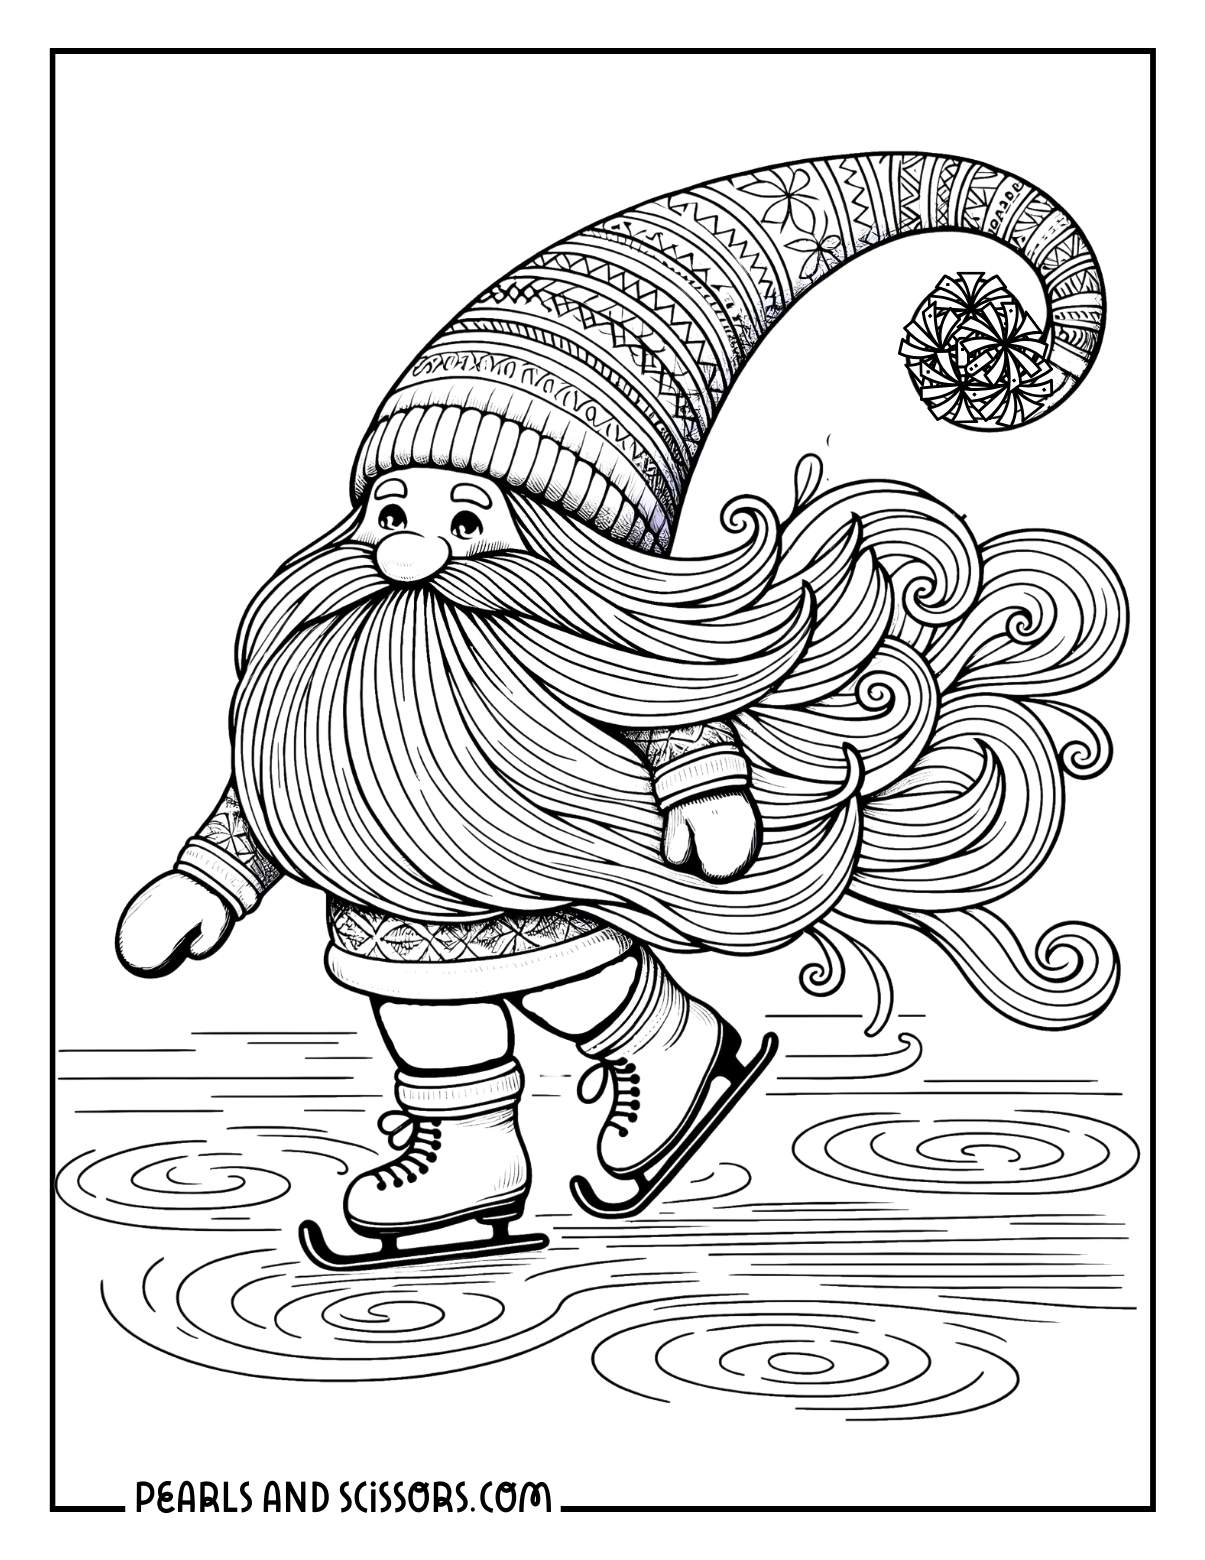 Scandinavian gnome with a long beard ice skating coloring page.